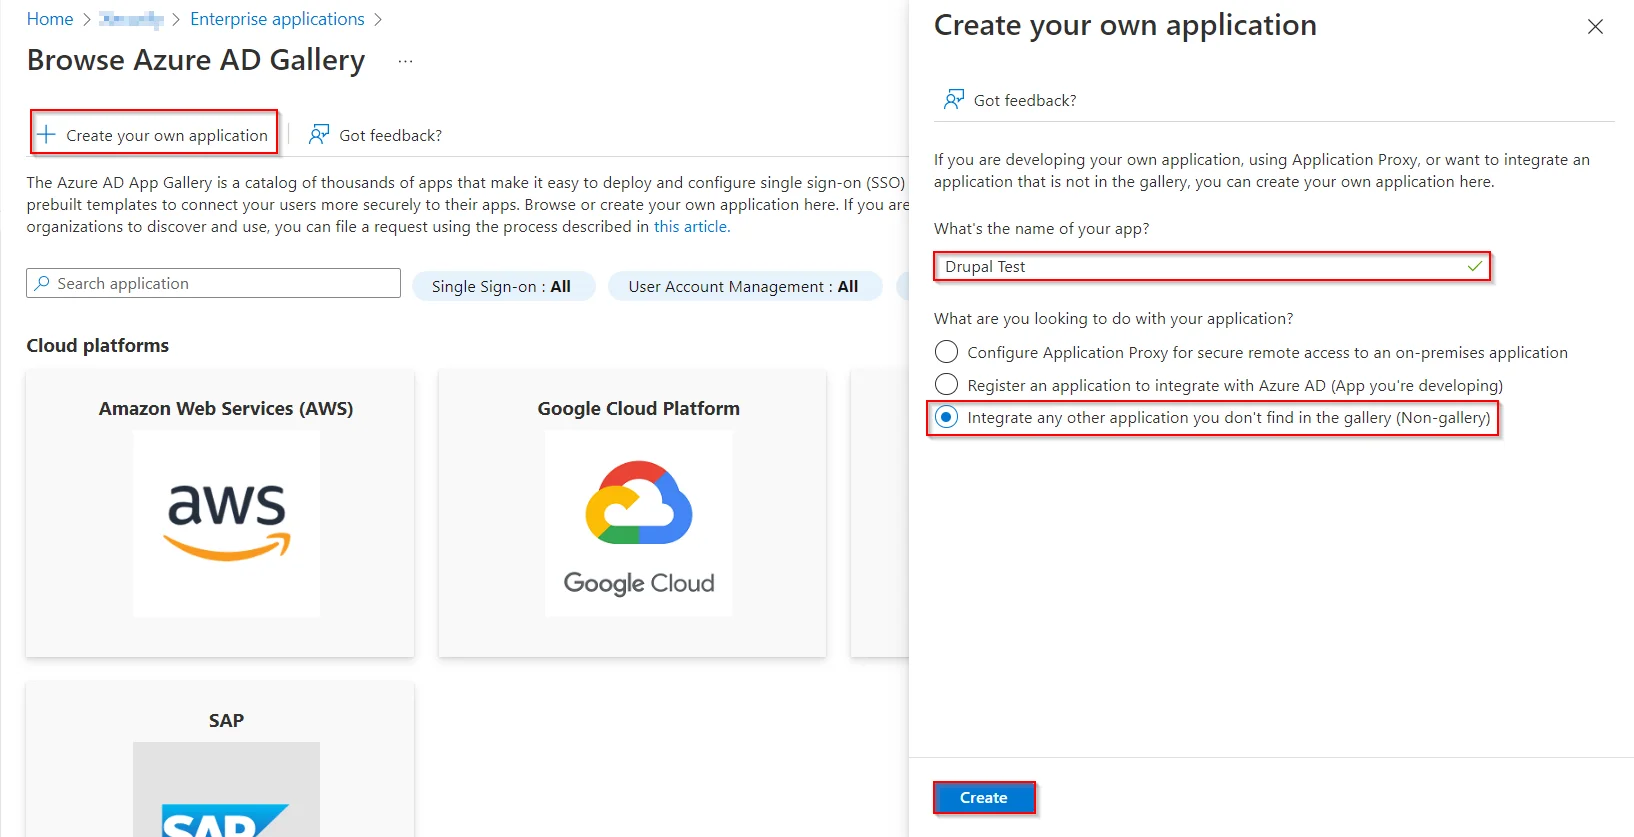 Microsoft Azure AD User Provisioning and Sync - Create your own application, enter app name, and select Non-Gallery